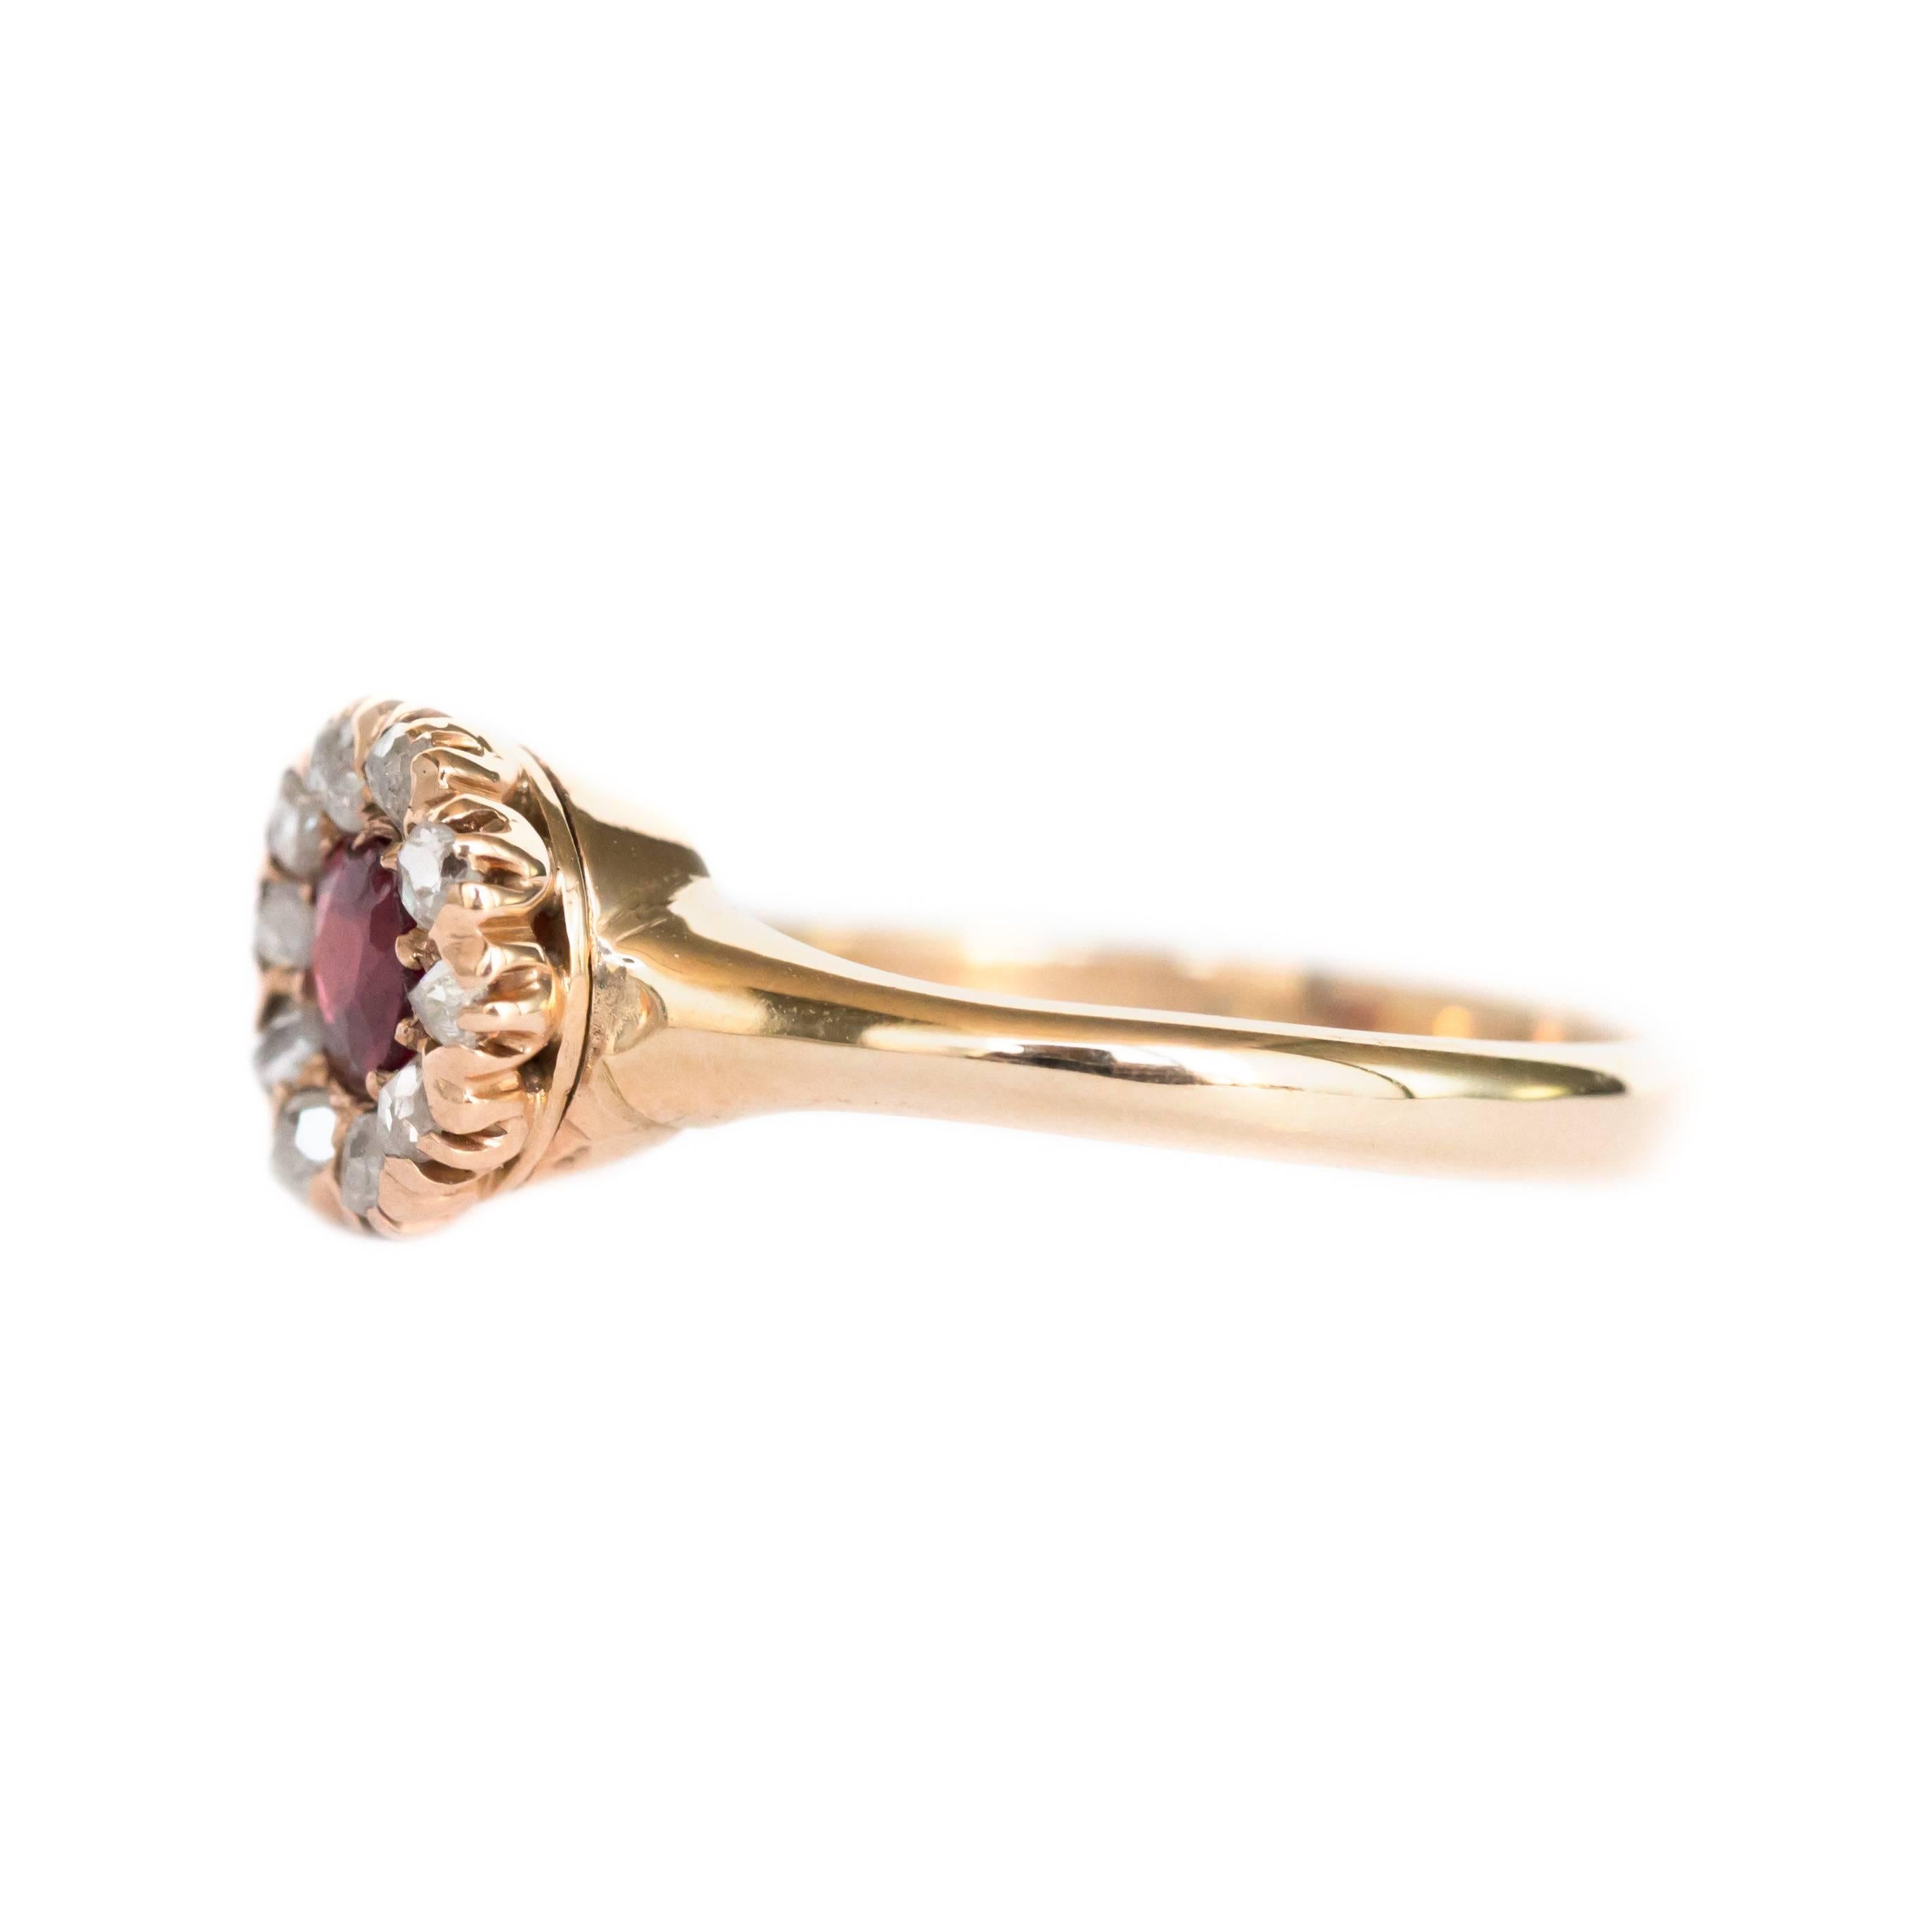 Item Details: 
Ring Size: 6
Metal Type: 14 Karat Yellow Gold (Rosey Undertone)
Weight: 2.4 grams

Side Stone Details: 
Shape: Rose Cut Diamonds 
Total Carat Weight: .10 carat, total weight
Color: G-H Color
Clarity: SI Clarity 

Color Stone Details: